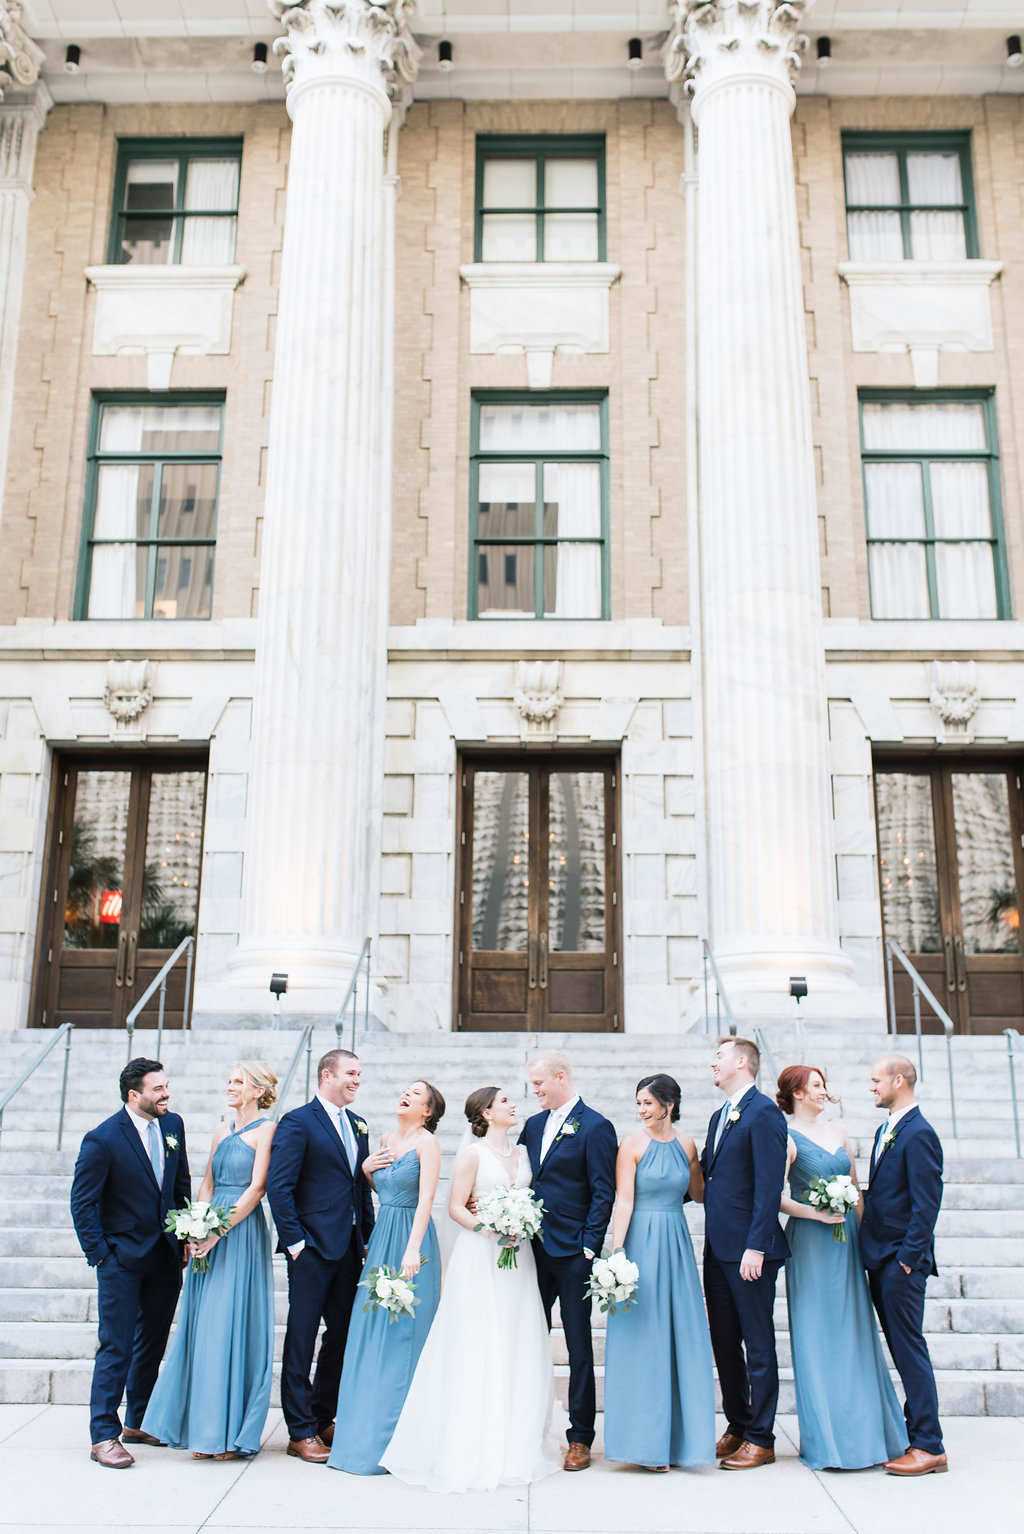 Outdoor Bride, Groom and Bridal Party Wedding Portrait on Front Steps of Historic Courthouse | Downtown Tampa Hotel Venue Le Meridien